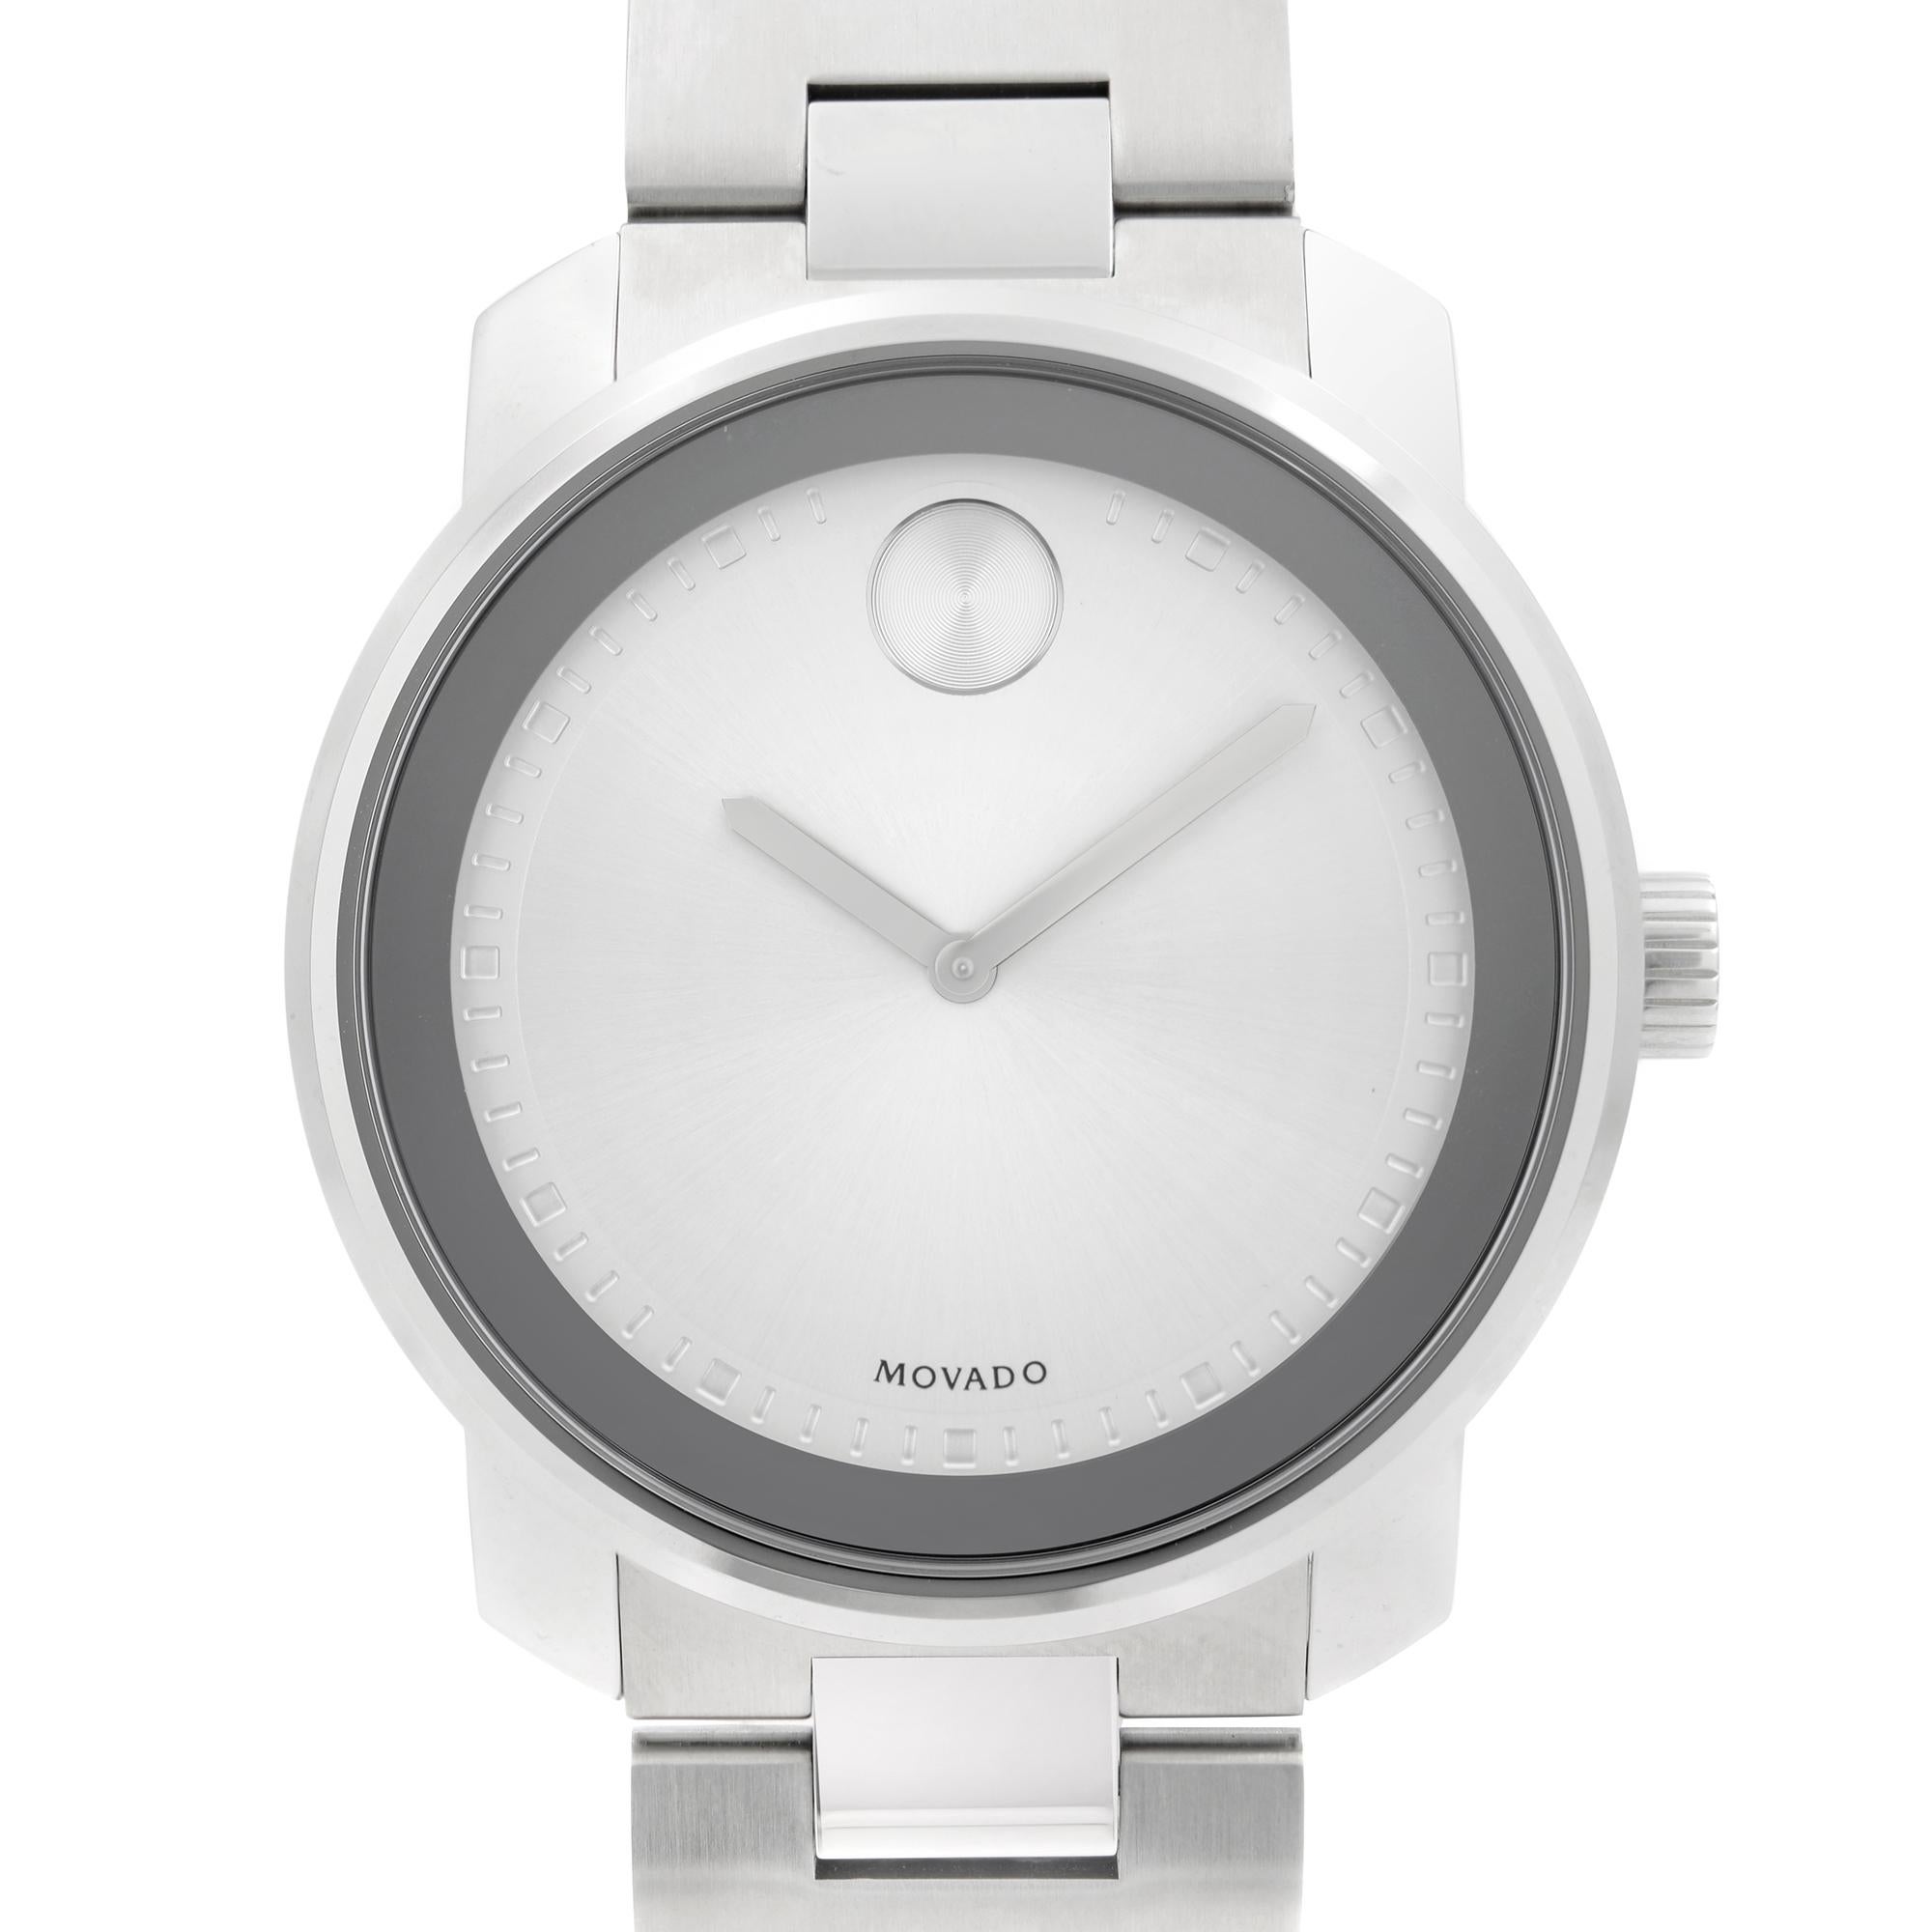 Unworn Movado Bold Stainless Steel Silver Dial Quartz Men's Watch 3600257. This Beautiful Timepiece Features: Stainless Steel Case and Bracelet. Fixed Stainless Steel Bezel. Silver Dial with Silver-Tone Hand, And Index Hour Markers. Comes with